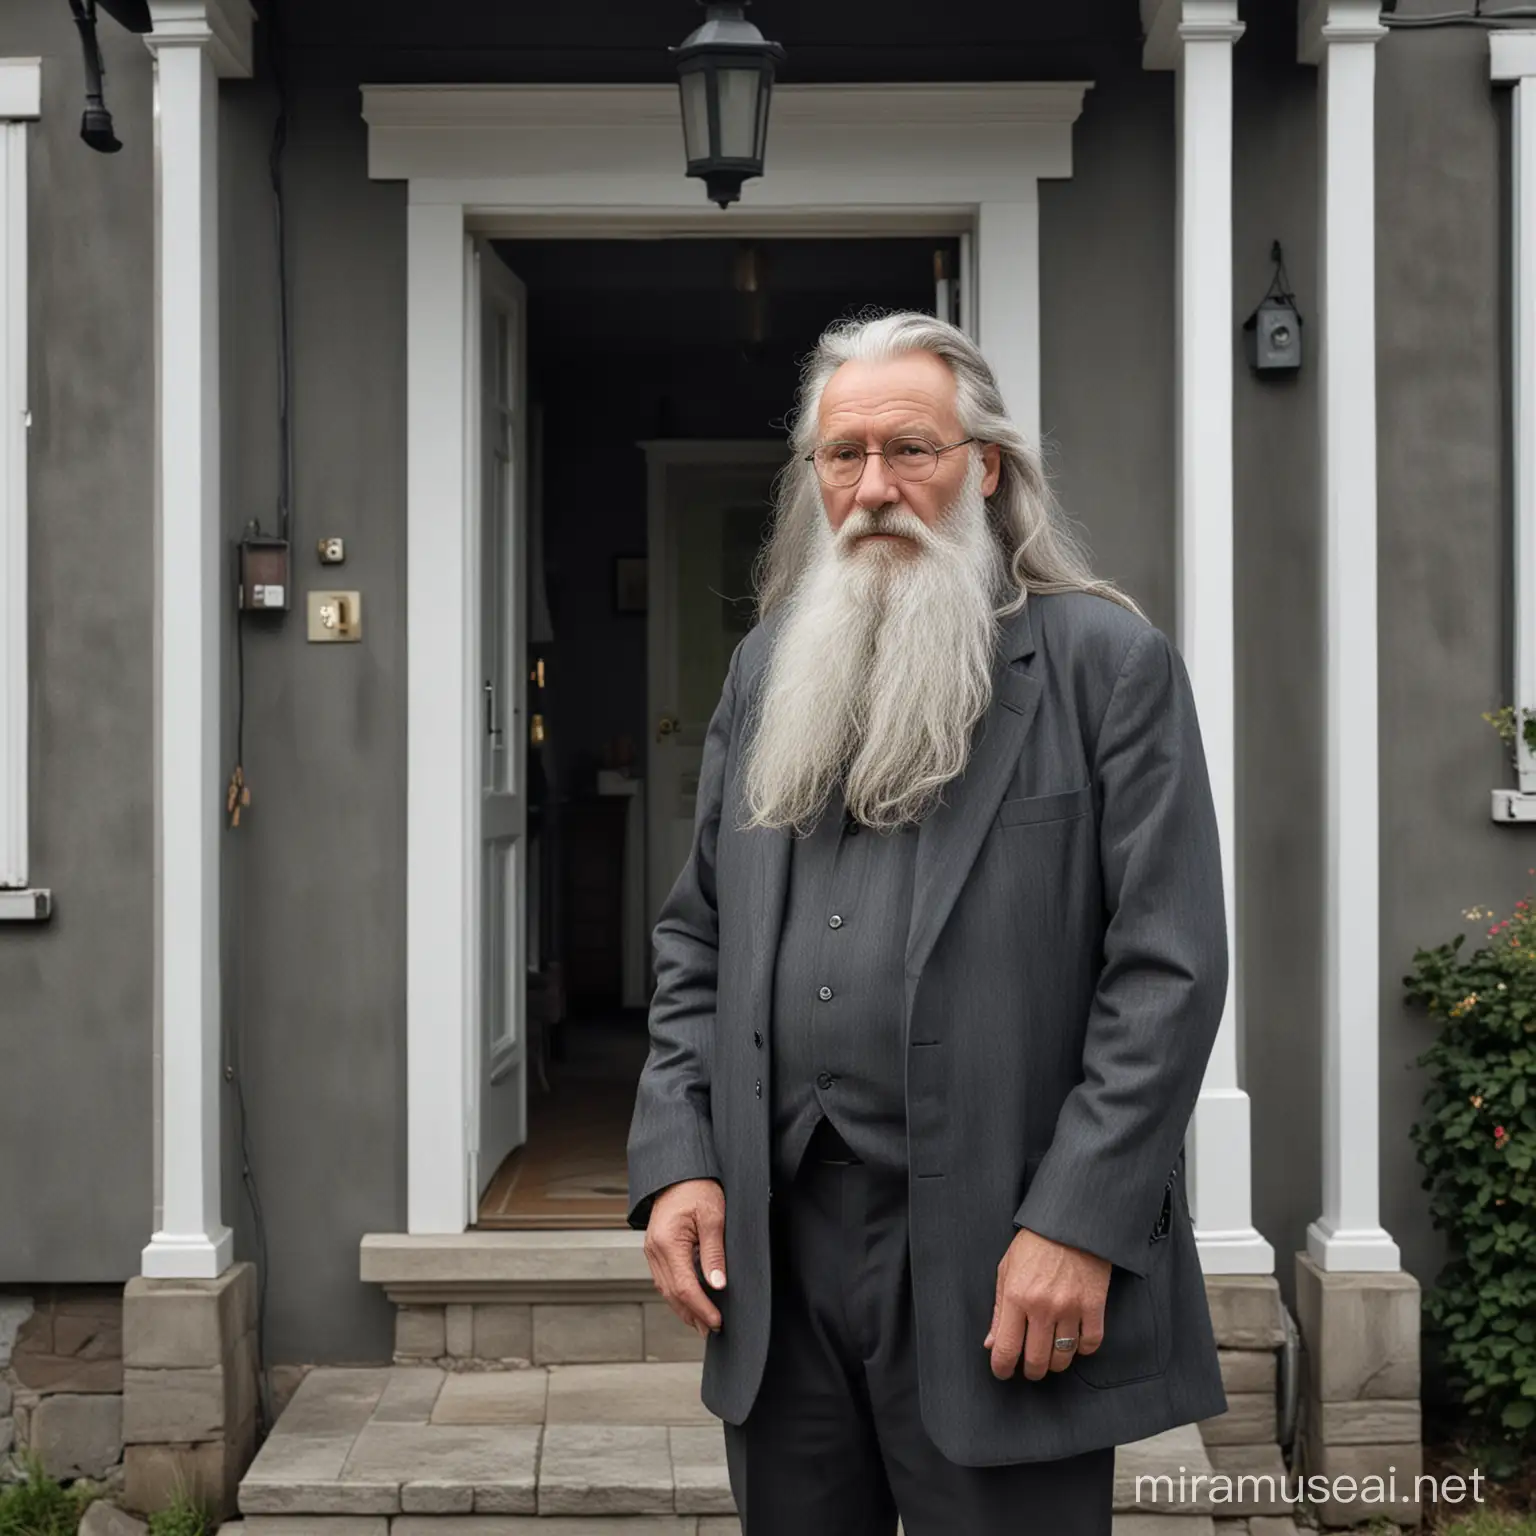 Portrait of Wise Swedish Philosopher Standing Outside His Detached House